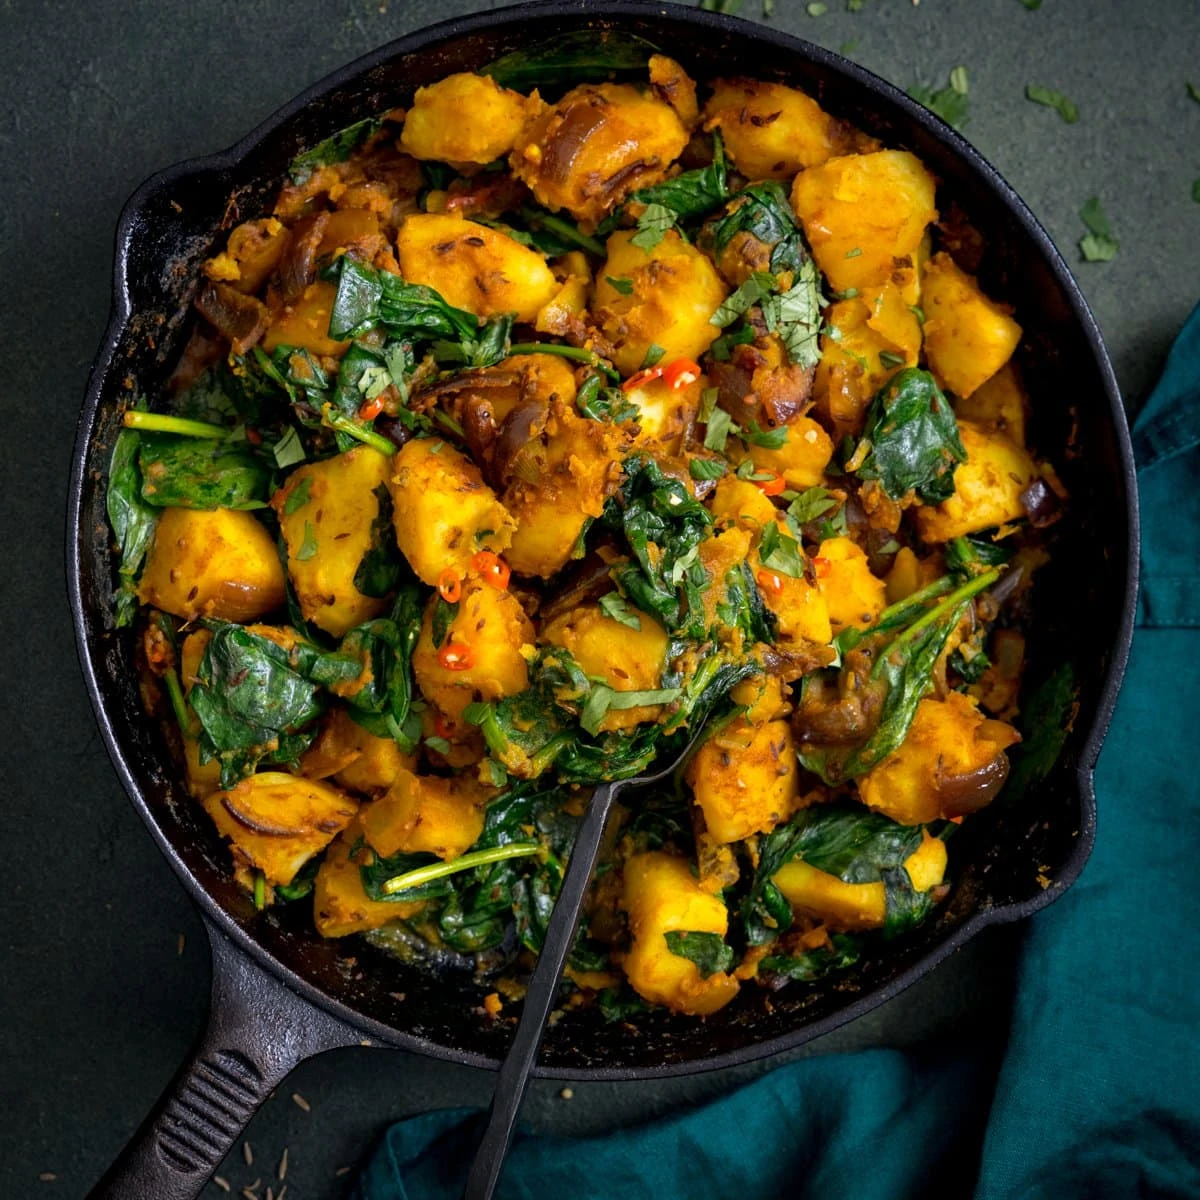 saag aloo in a black pan on a dark background